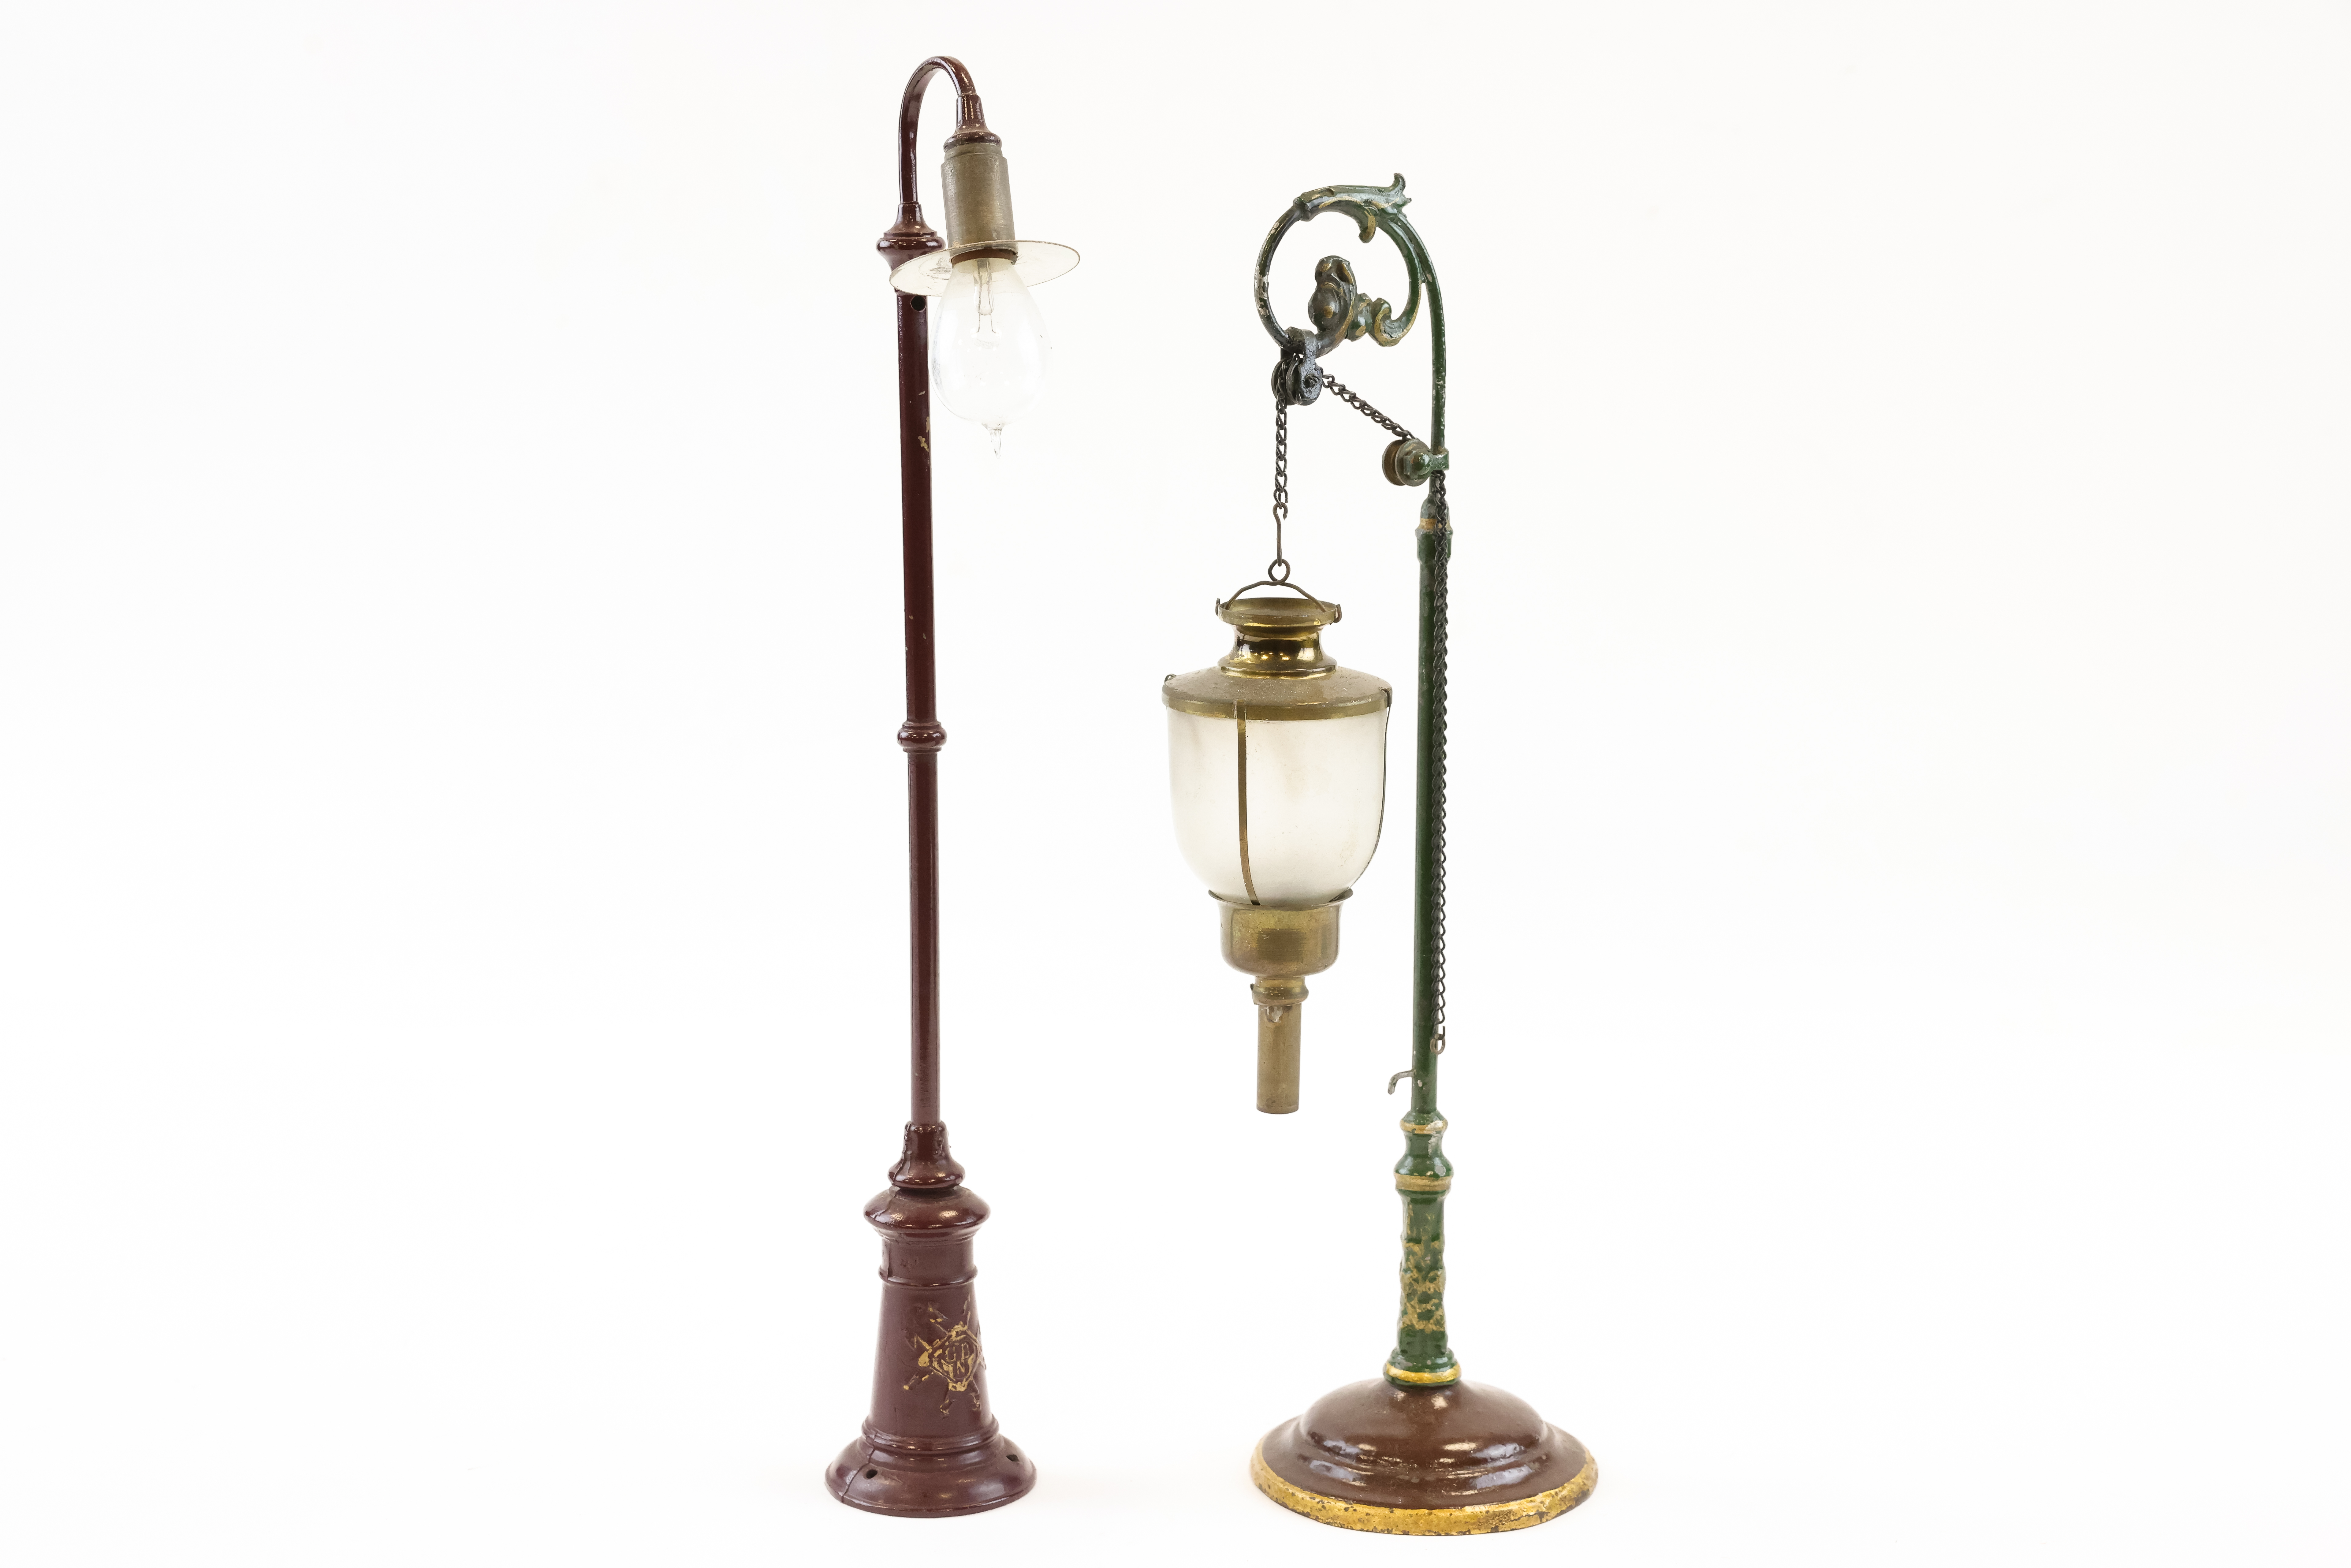 Marklin, Early 20th century street lamp, in cast metal and tinplate, Lamp is brass with its original